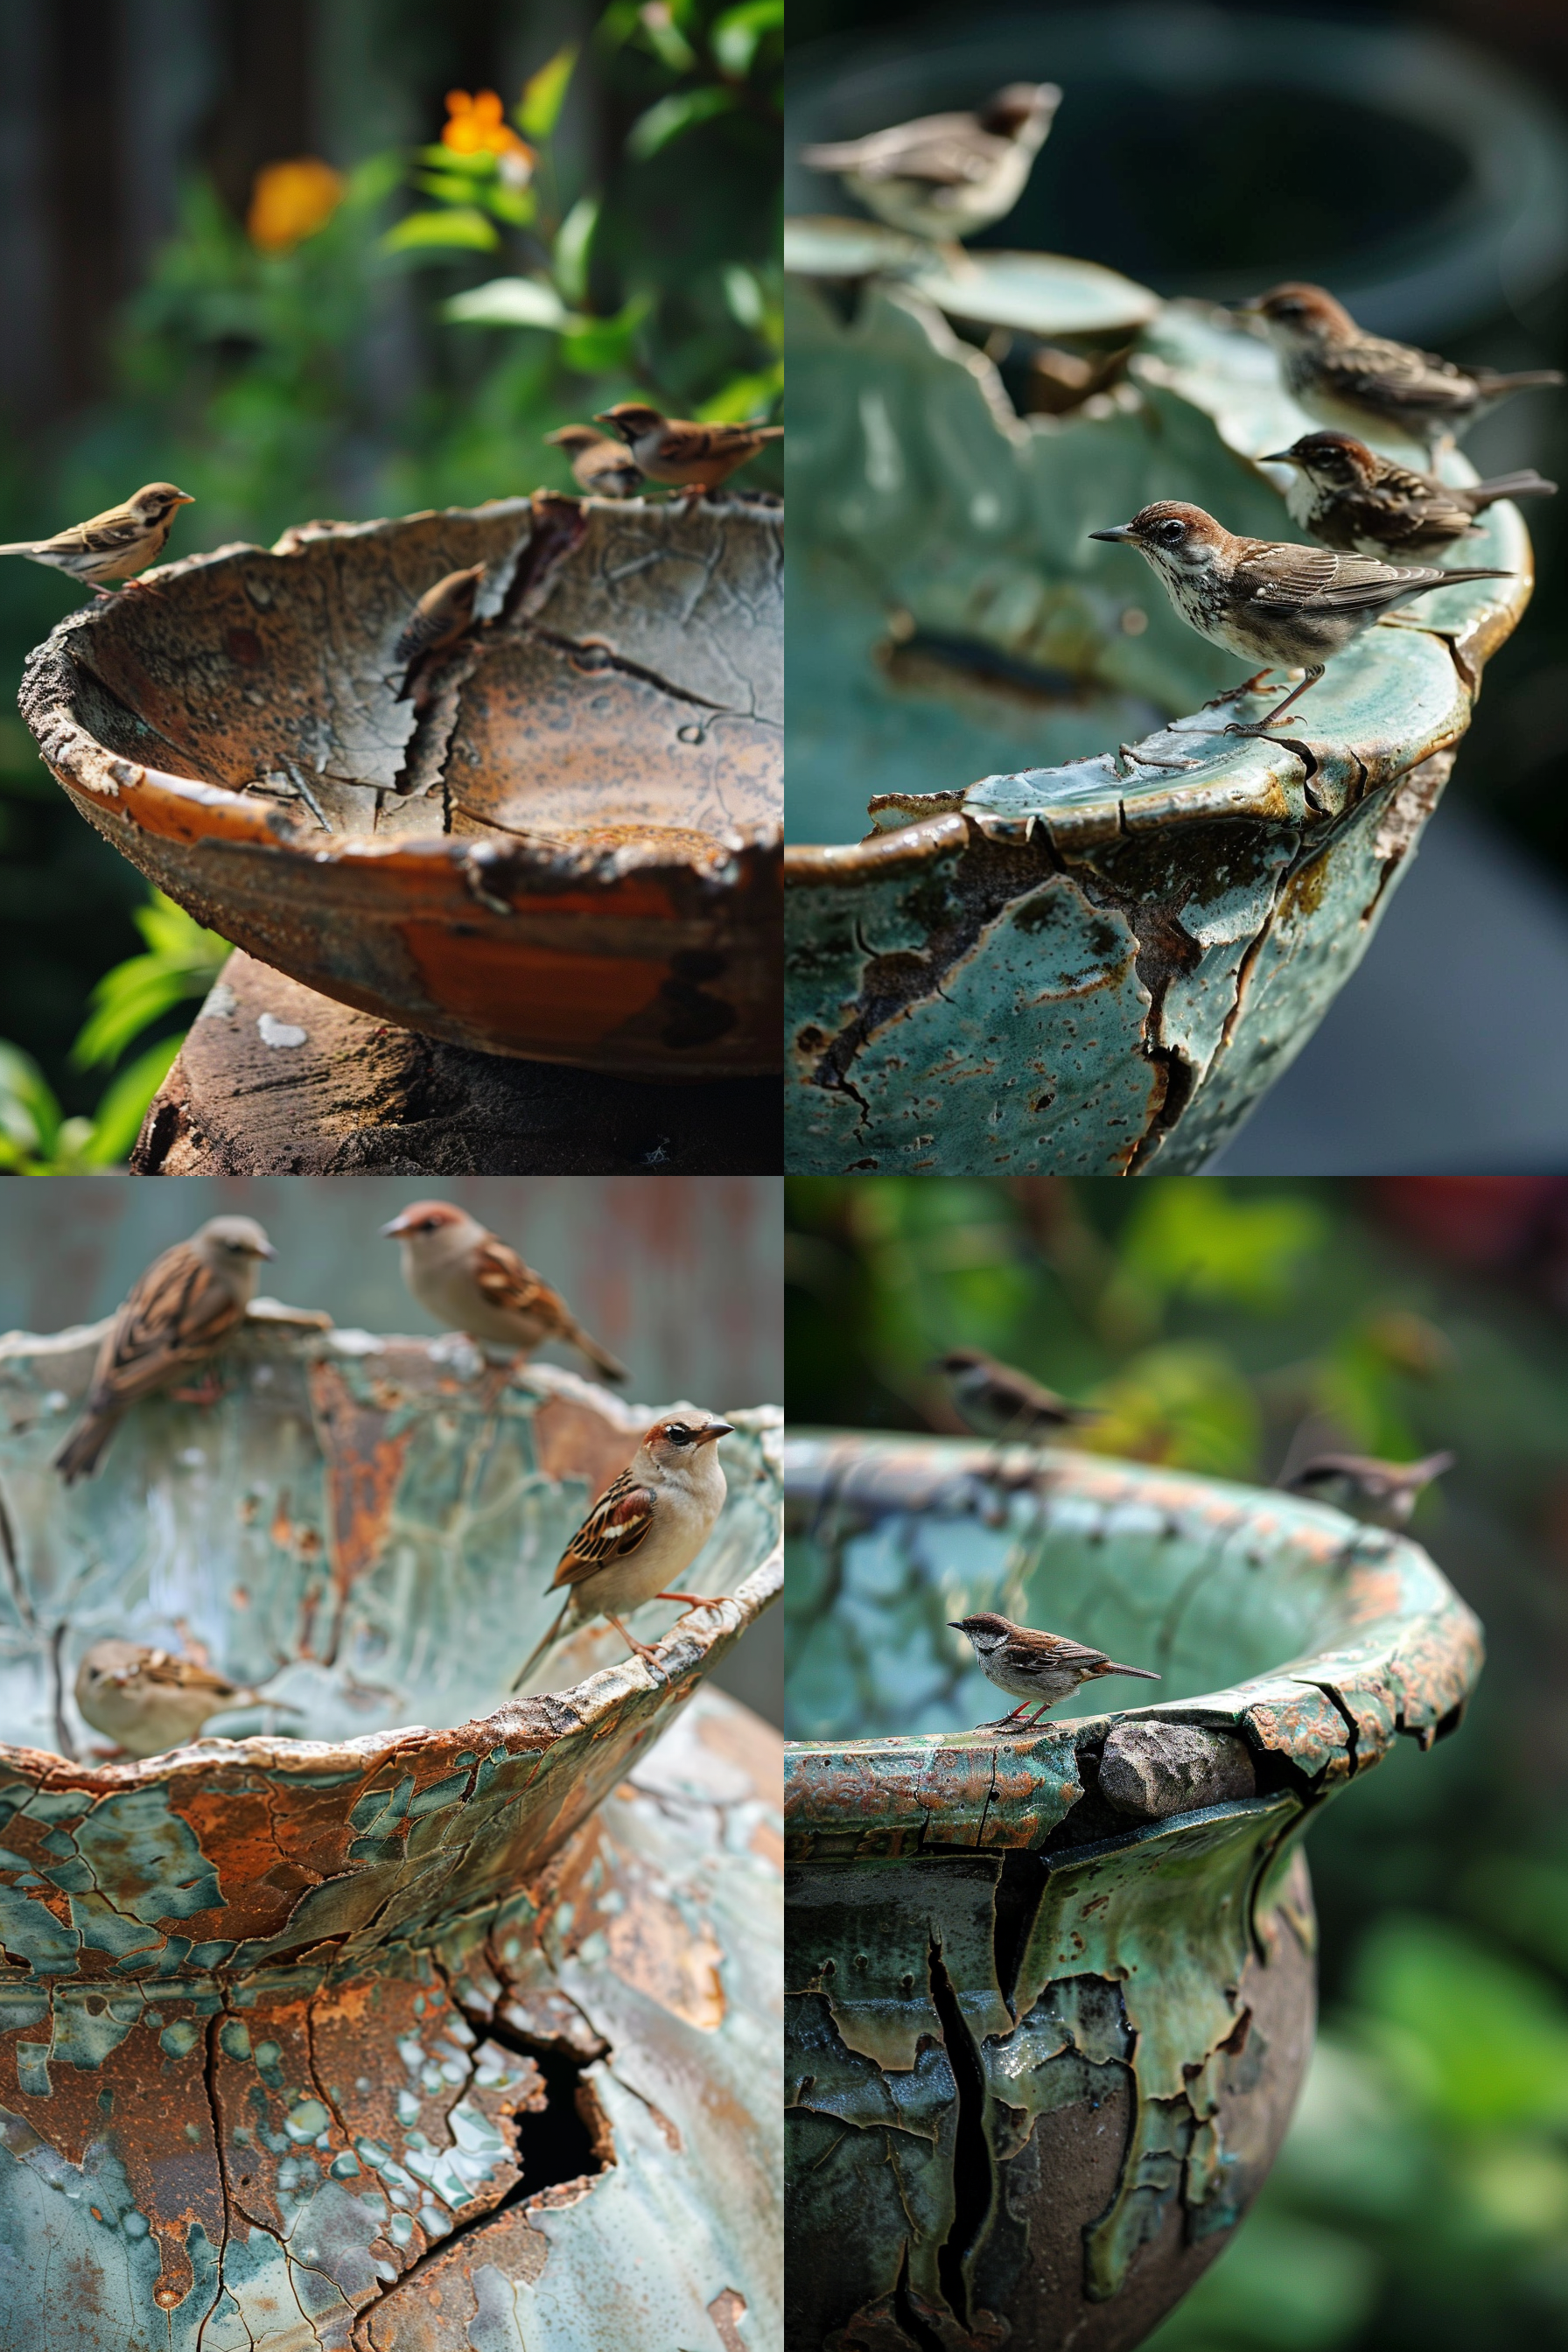 Four composite images showing sparrows perched on edges of a weathered, cracked ceramic bird bath.